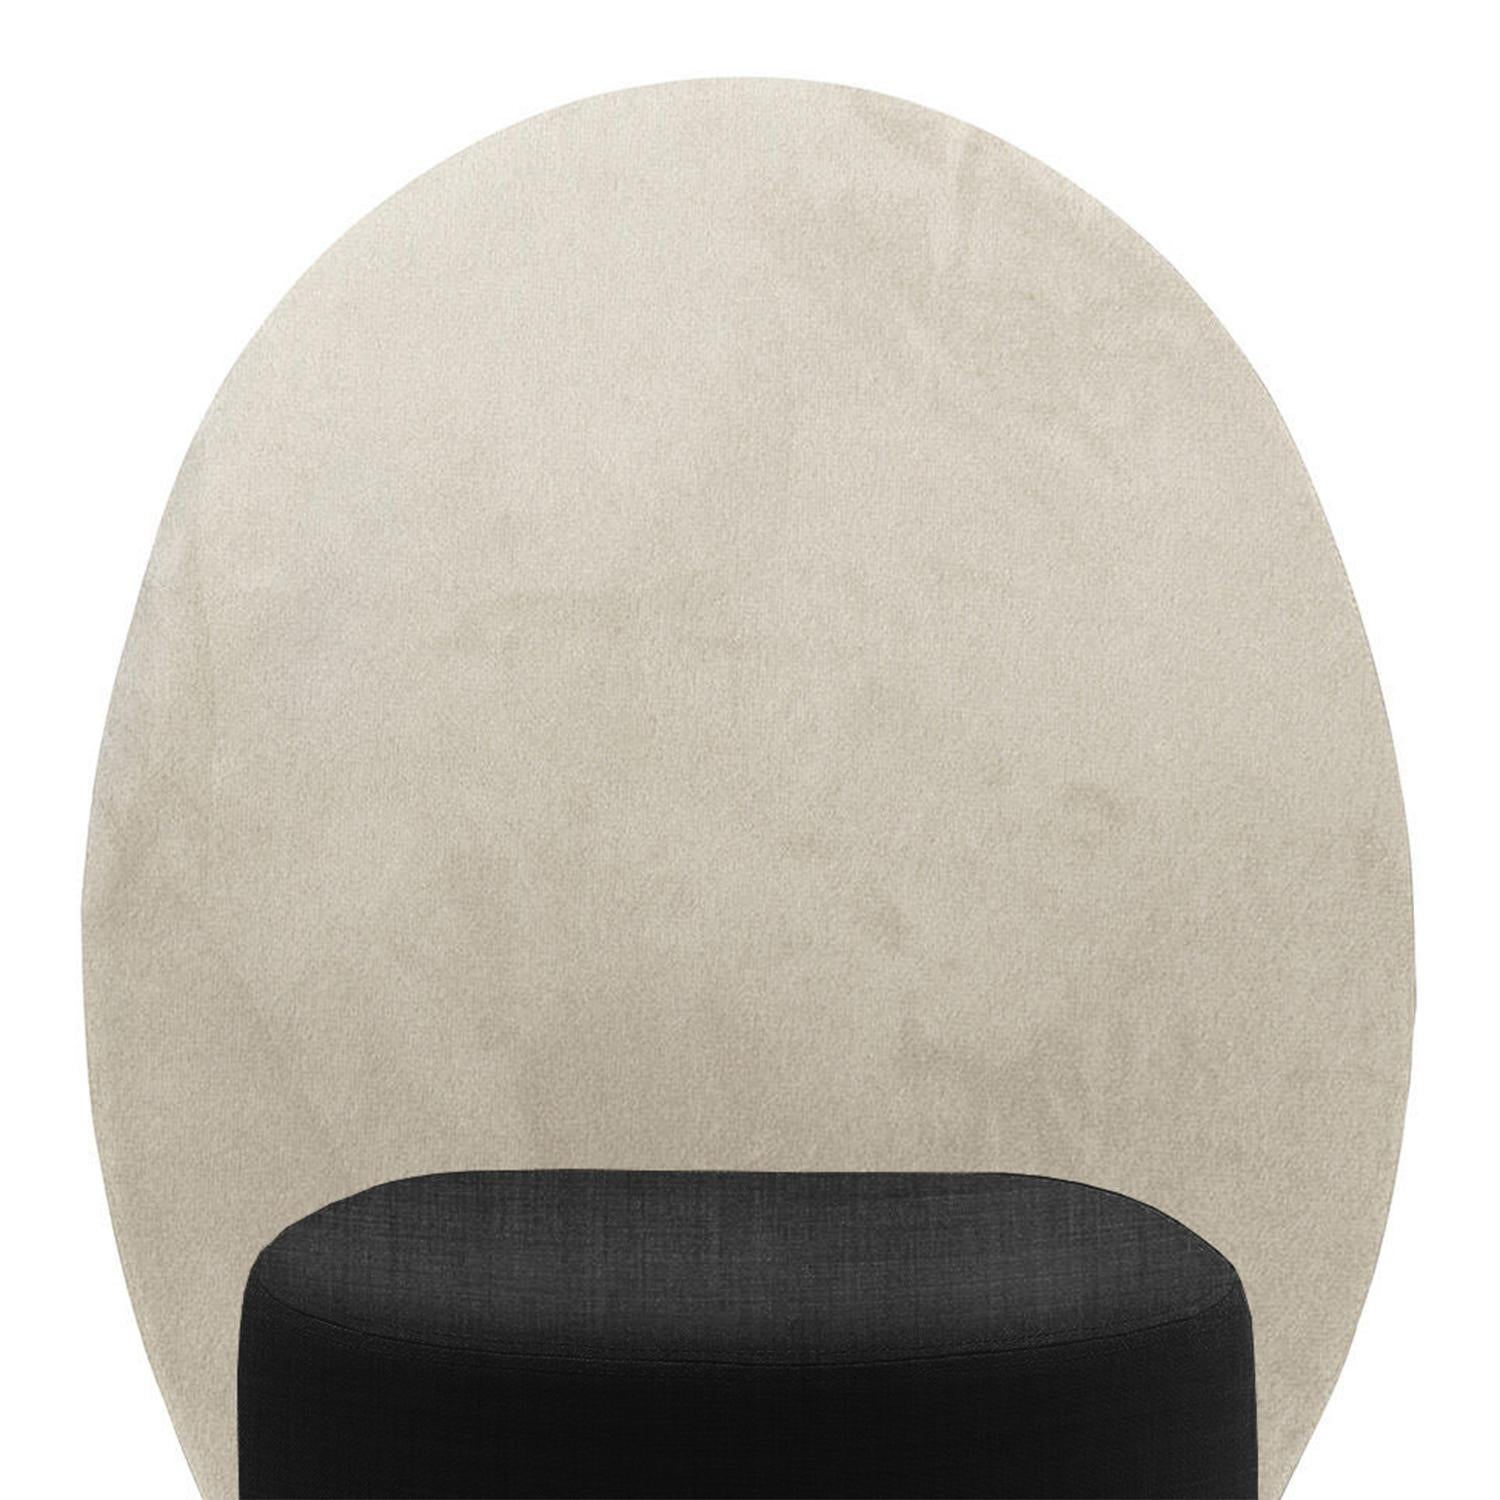 Contemporary Juddy Chair For Sale